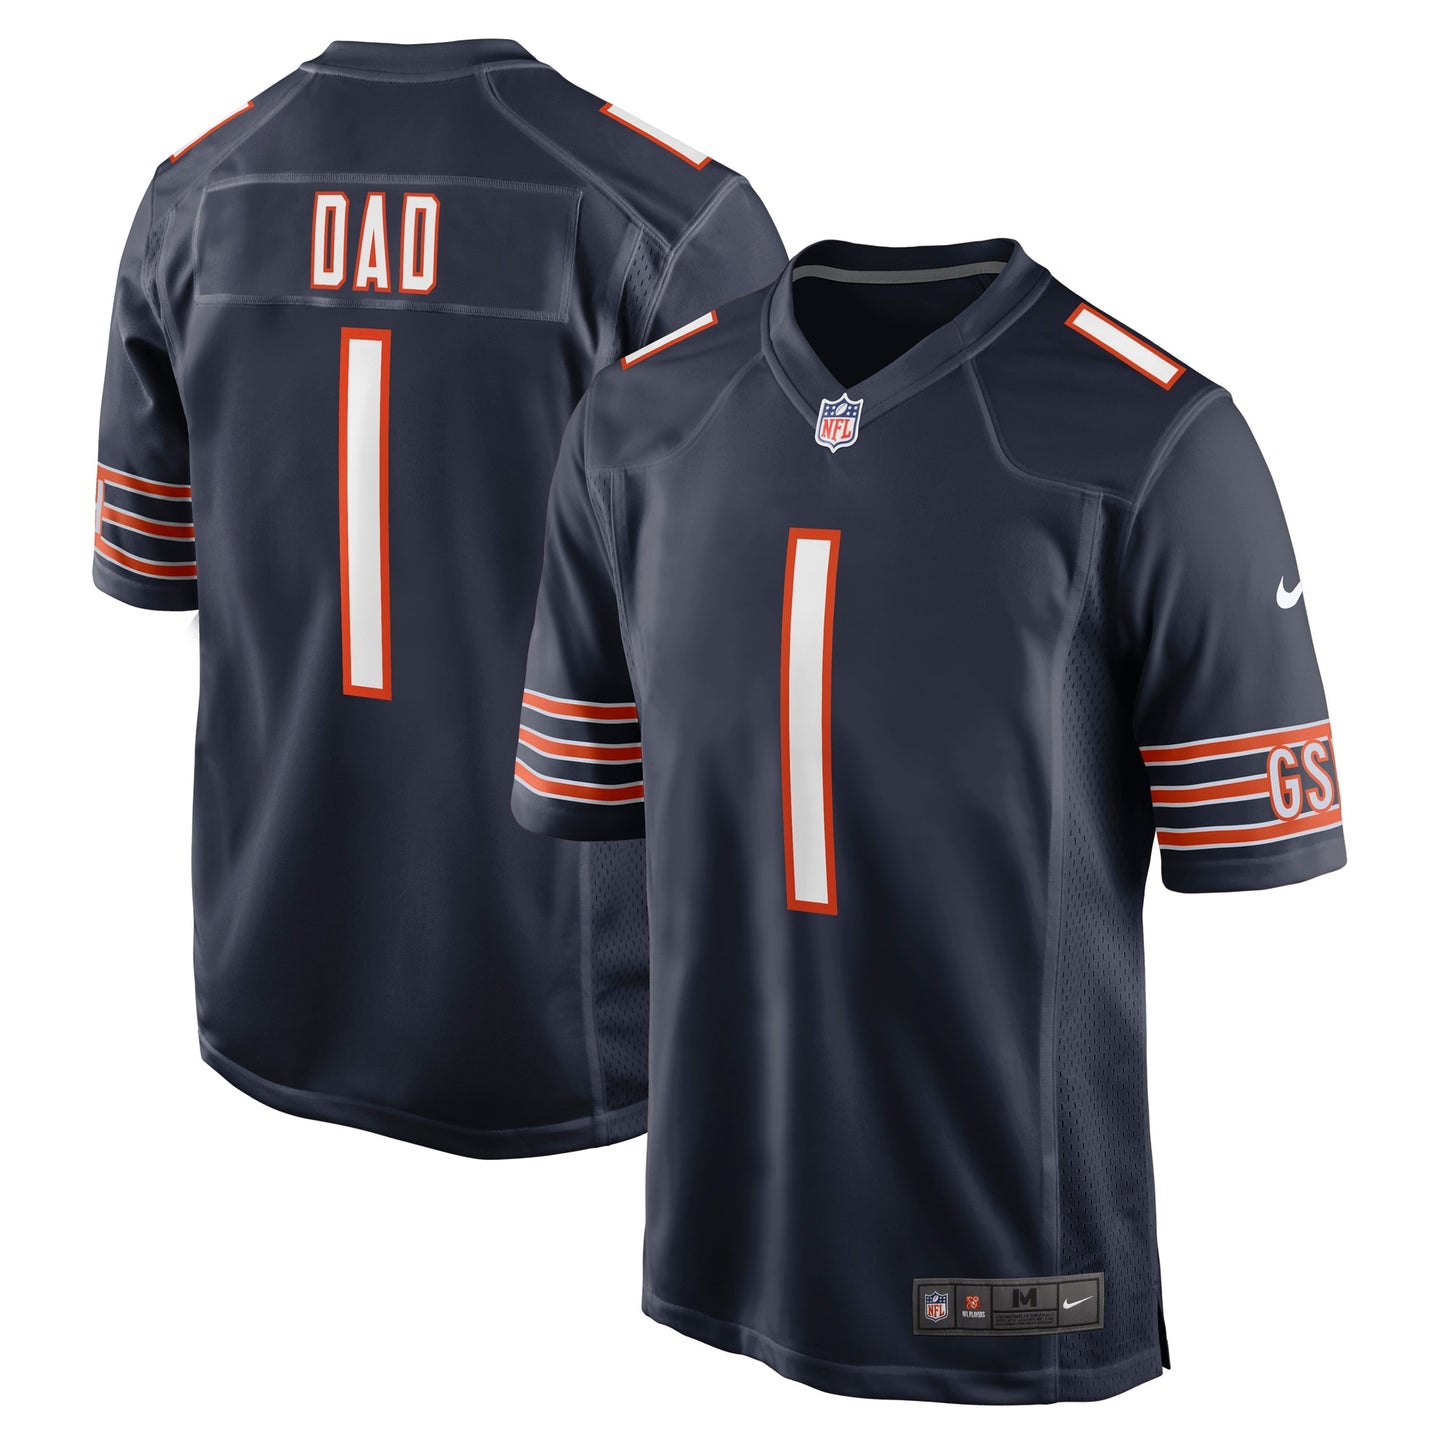 Number 1 Dad Chicago Bears Nike Game Jersey - Navy